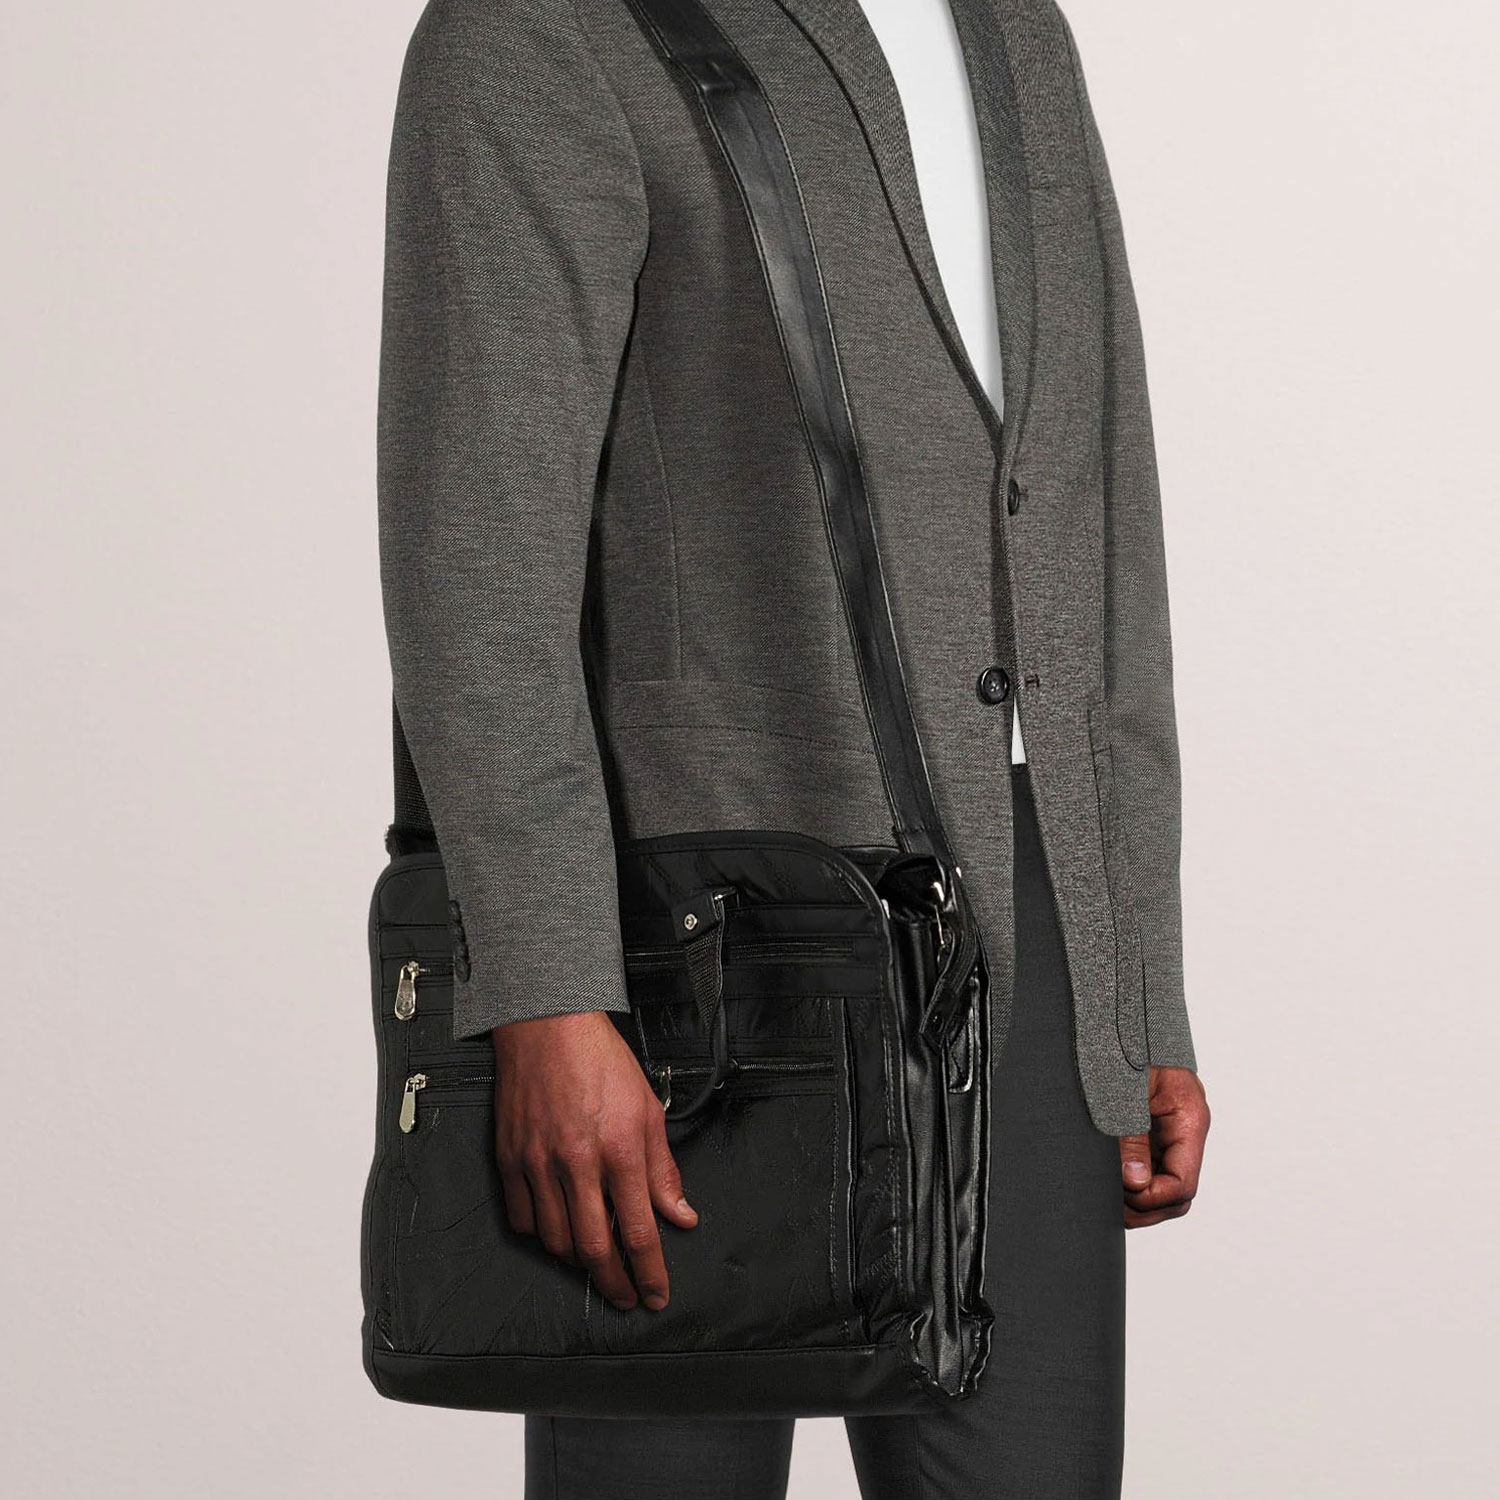 Black Leather Briefcase With Laptop Pocket